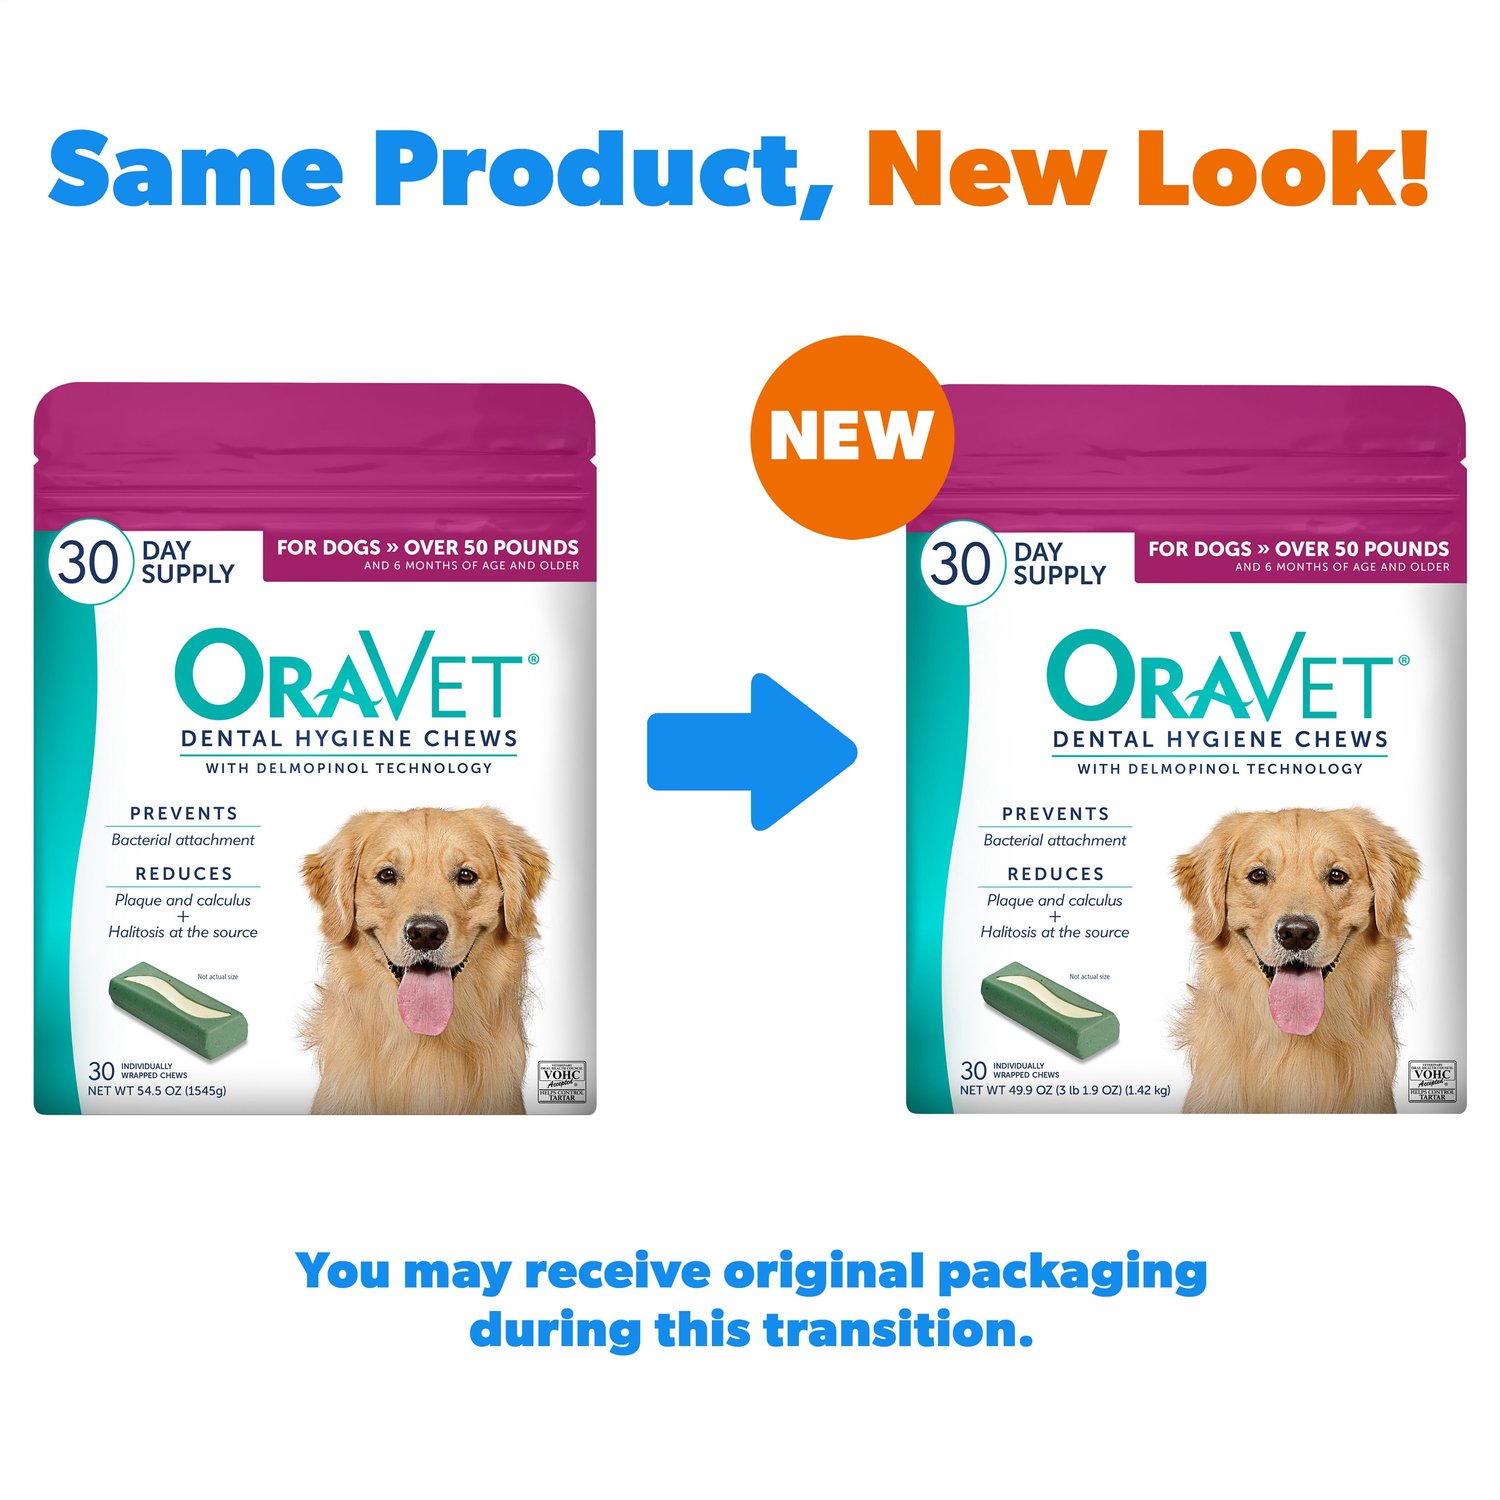 OraVet Dental Hygiene Chews for Dogs, over 50 lbs, 30 count - Chewy.com